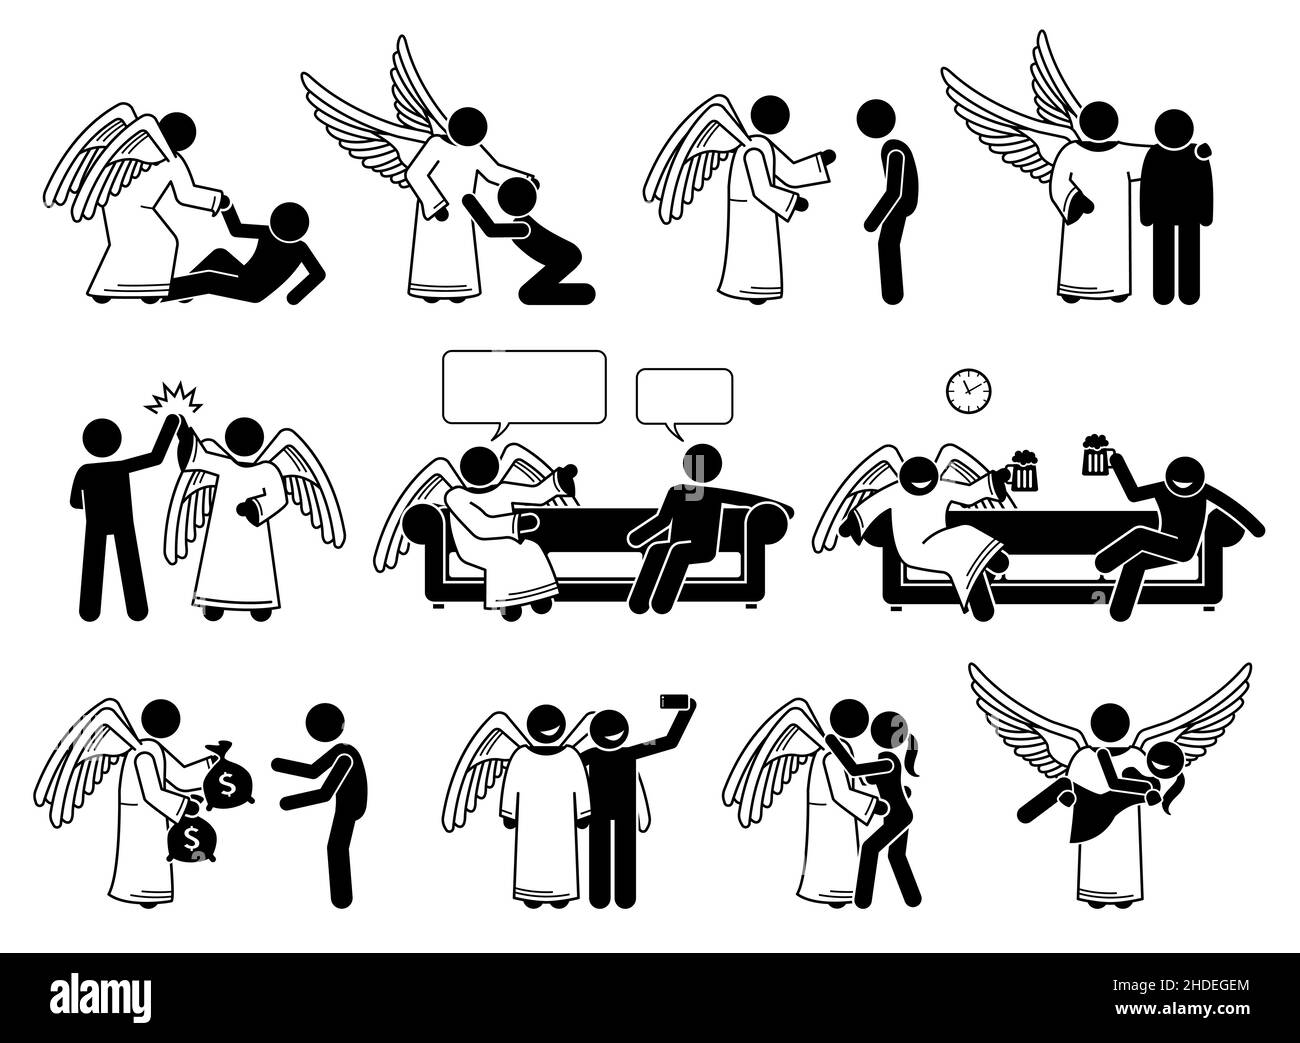 God angel and human stick figure pictogram icons. Vector illustrations depict angel helping, rescue, save, support, giving advice, love, and romance w Stock Vector